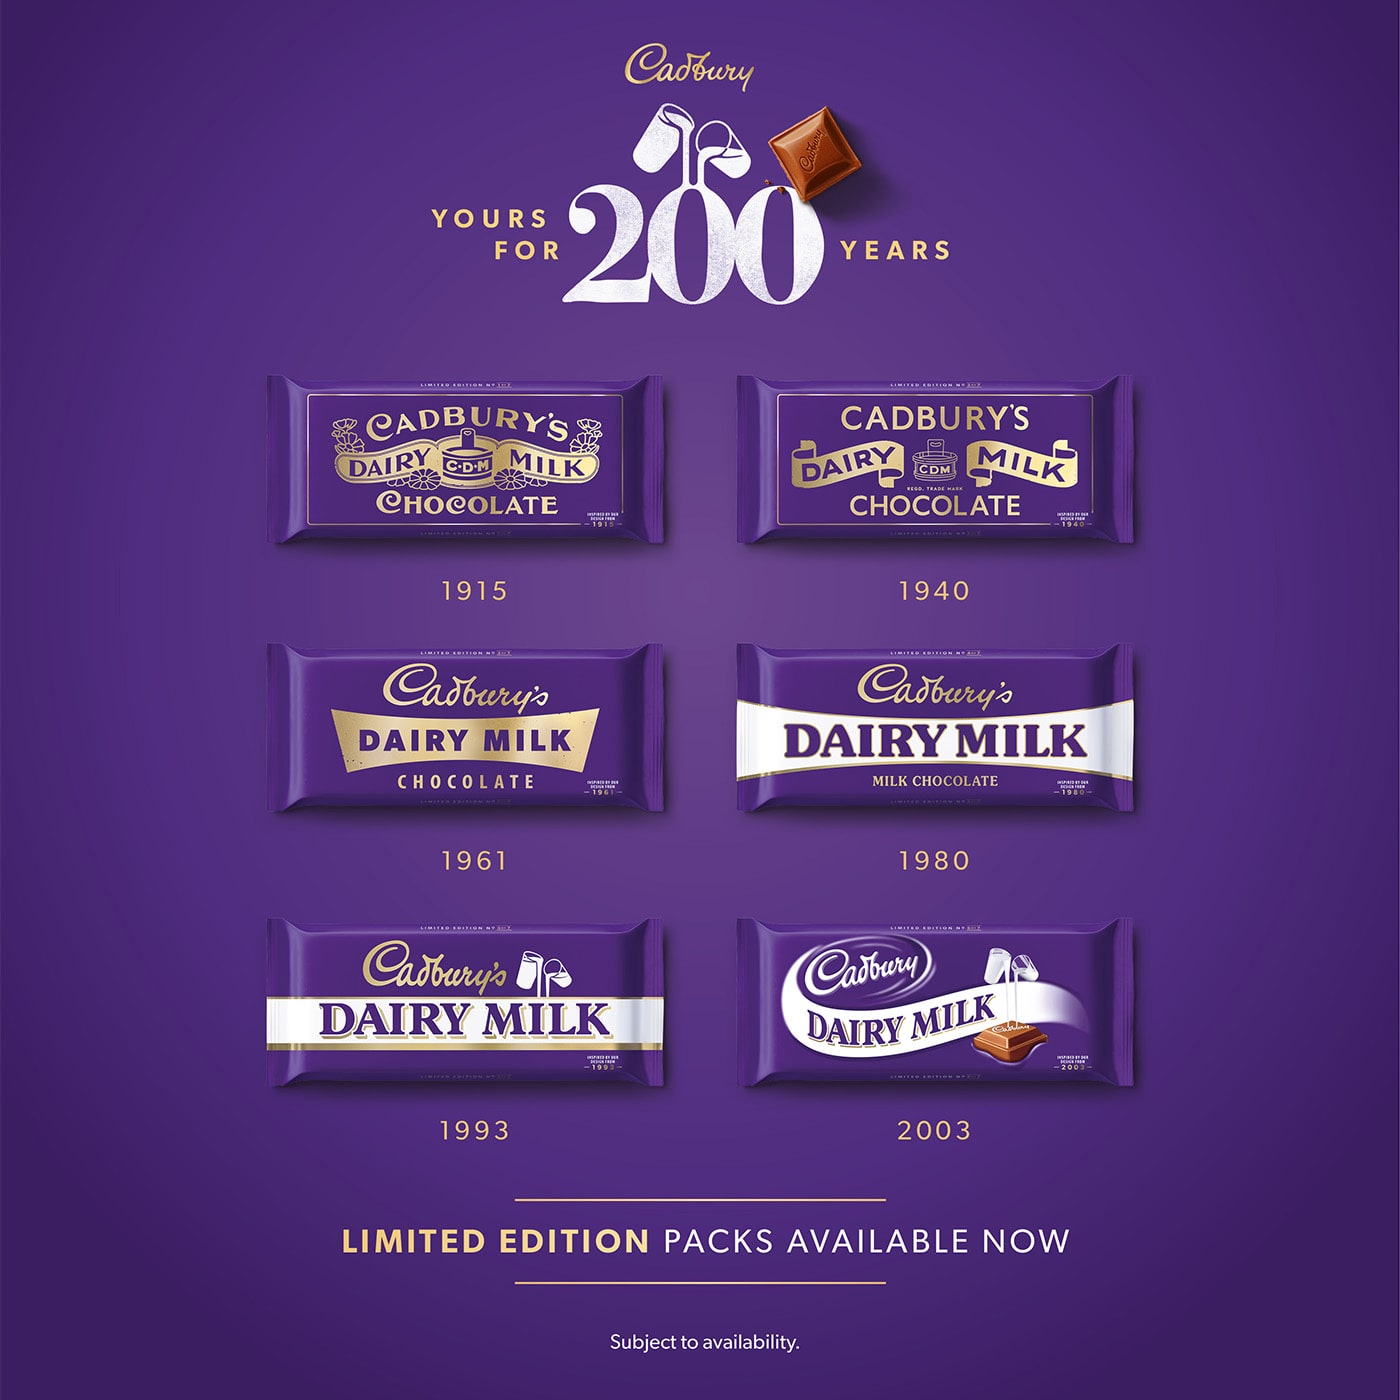 YOURS FOR 200 YEARS: CADBURY BRINGS BACK RETRO PACKAGING